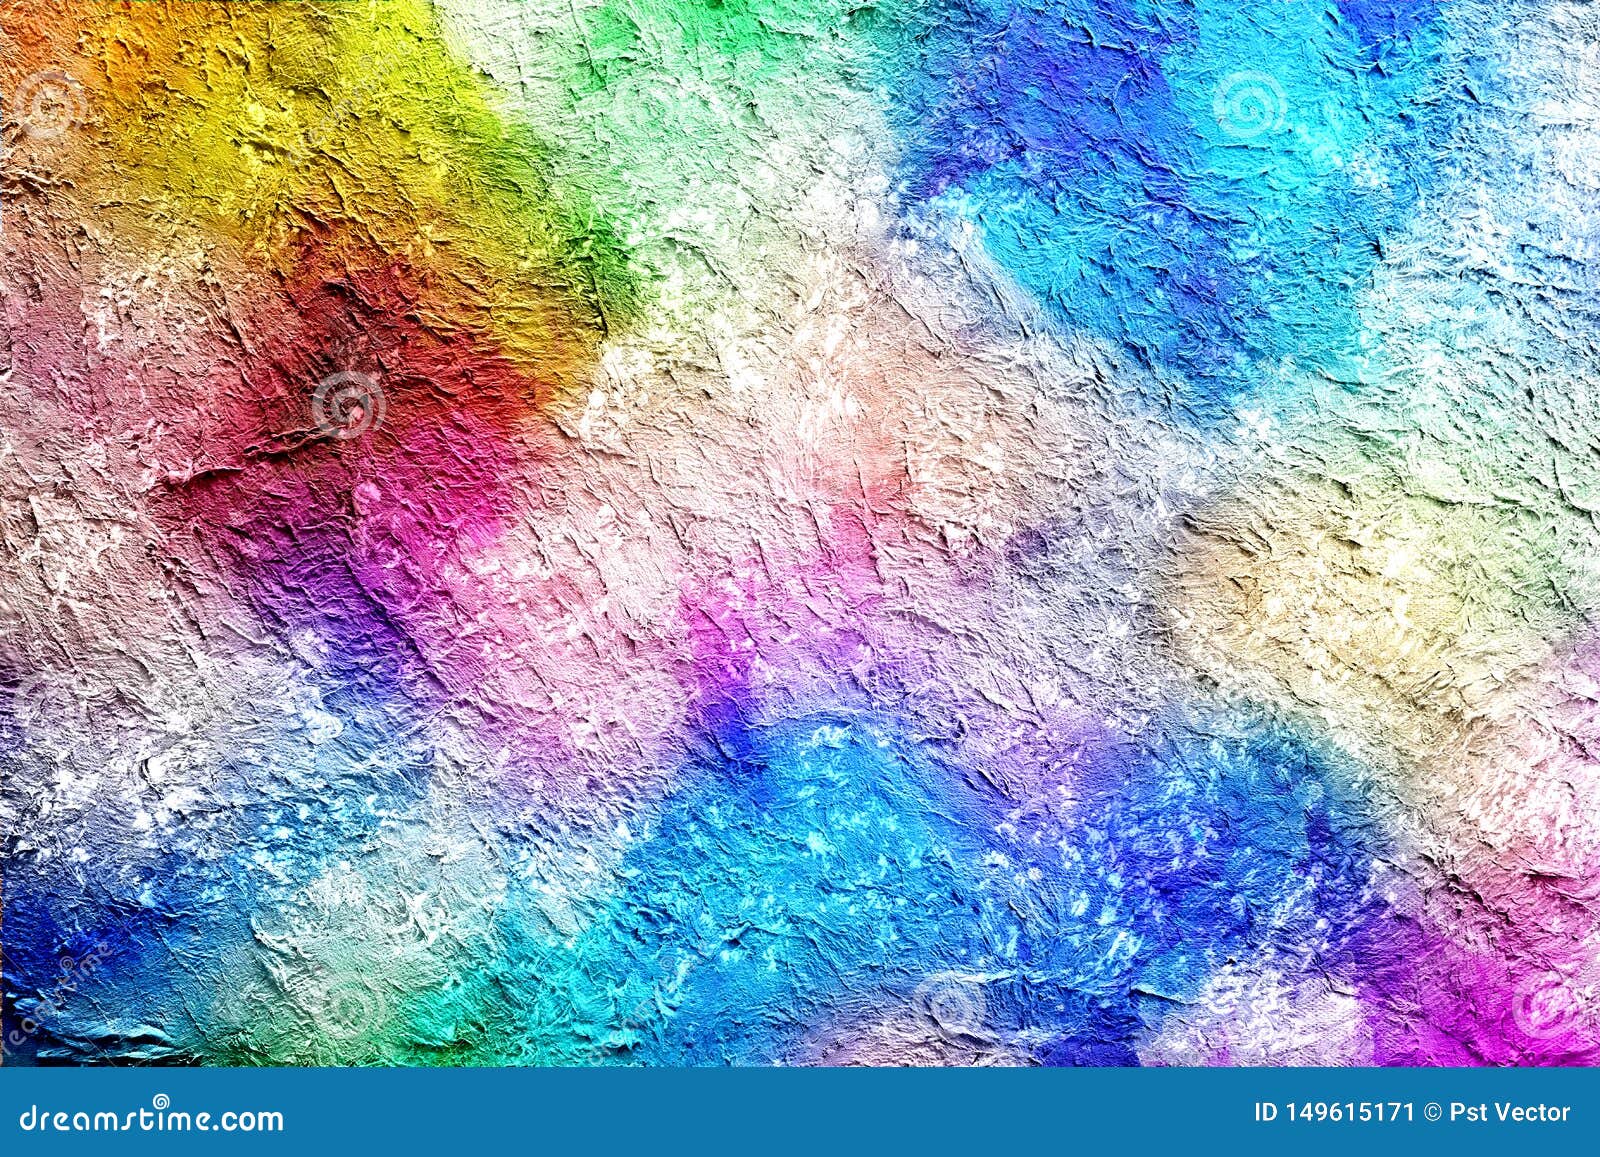 Abstract Painting Drawn Watercolor Background by Digital Brush Technique,  Wallpaper with Watercolor Pattern Full Color Texture Stock Image - Image of  background, isolated: 149615171